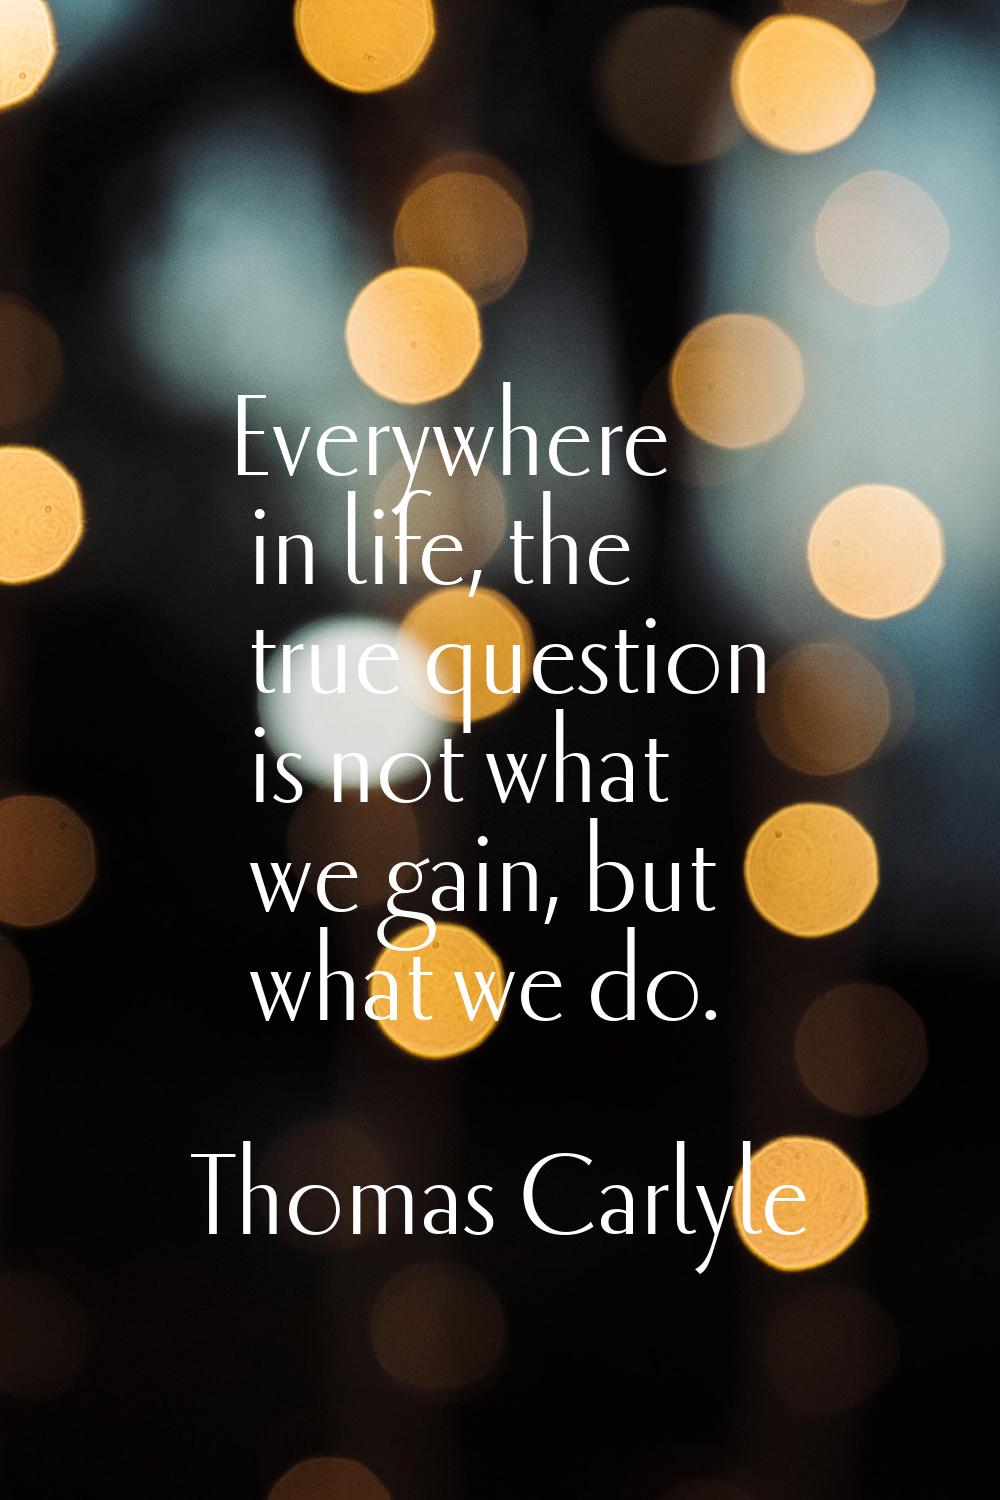 Everywhere in life, the true question is not what we gain, but what we do.